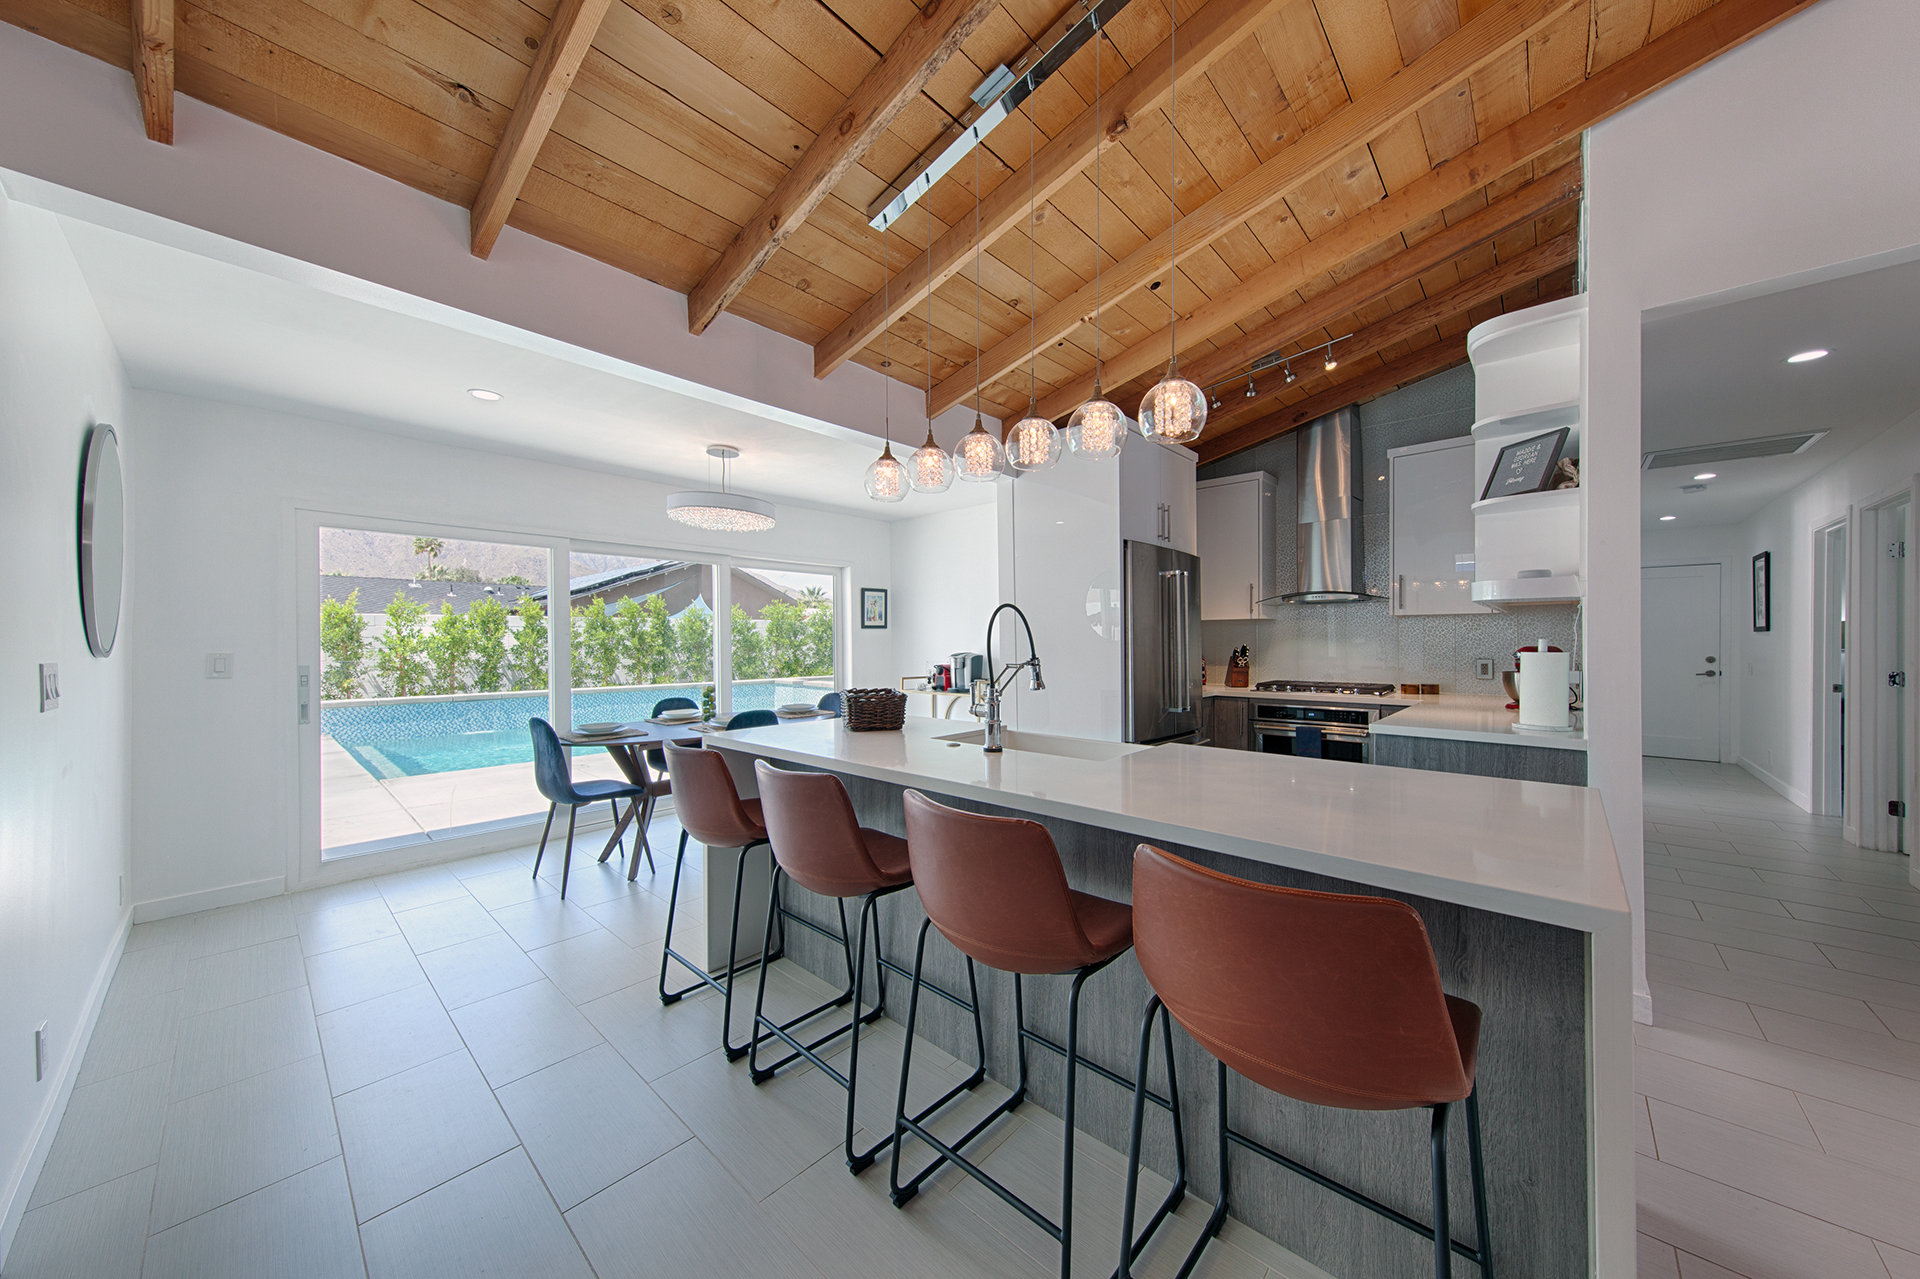 Remodled kitchen with leather stools in a home in Palm Springs, California